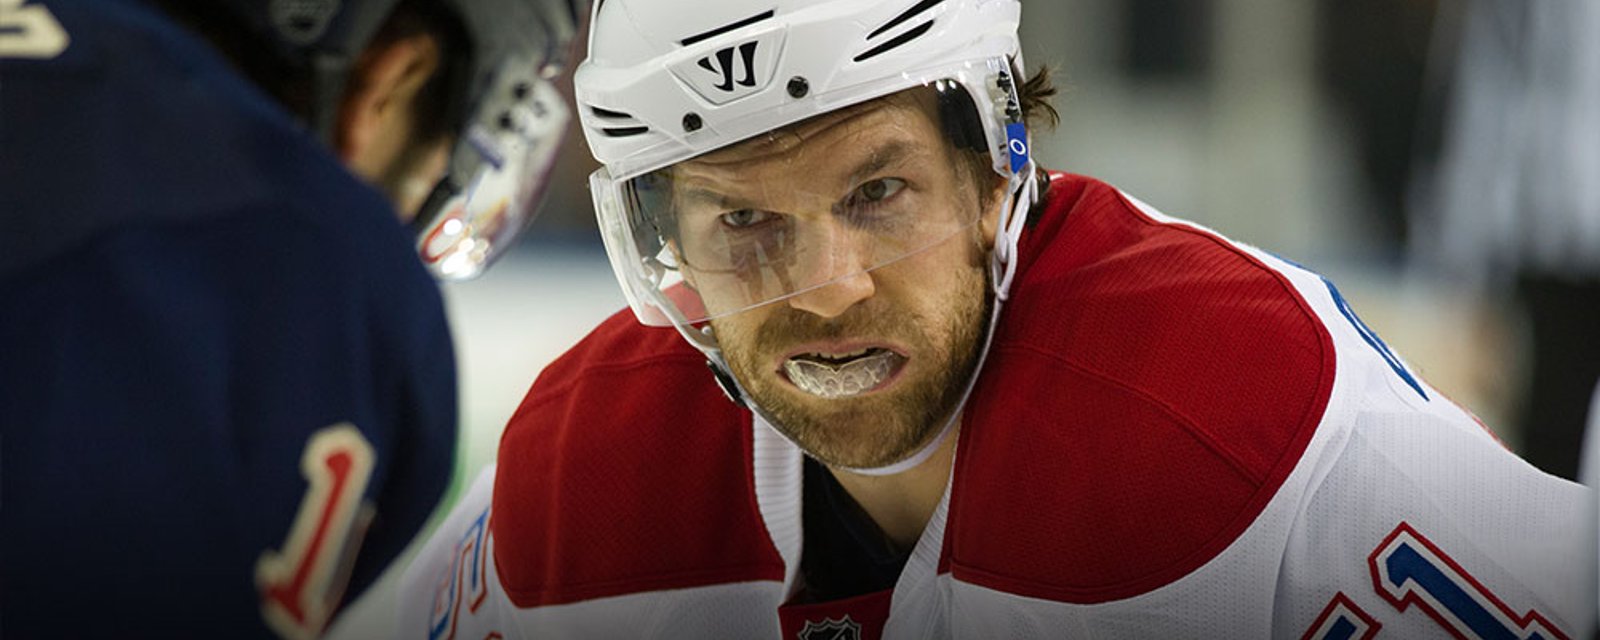 ICYMI: Desharnais inks a new deal in free-agency